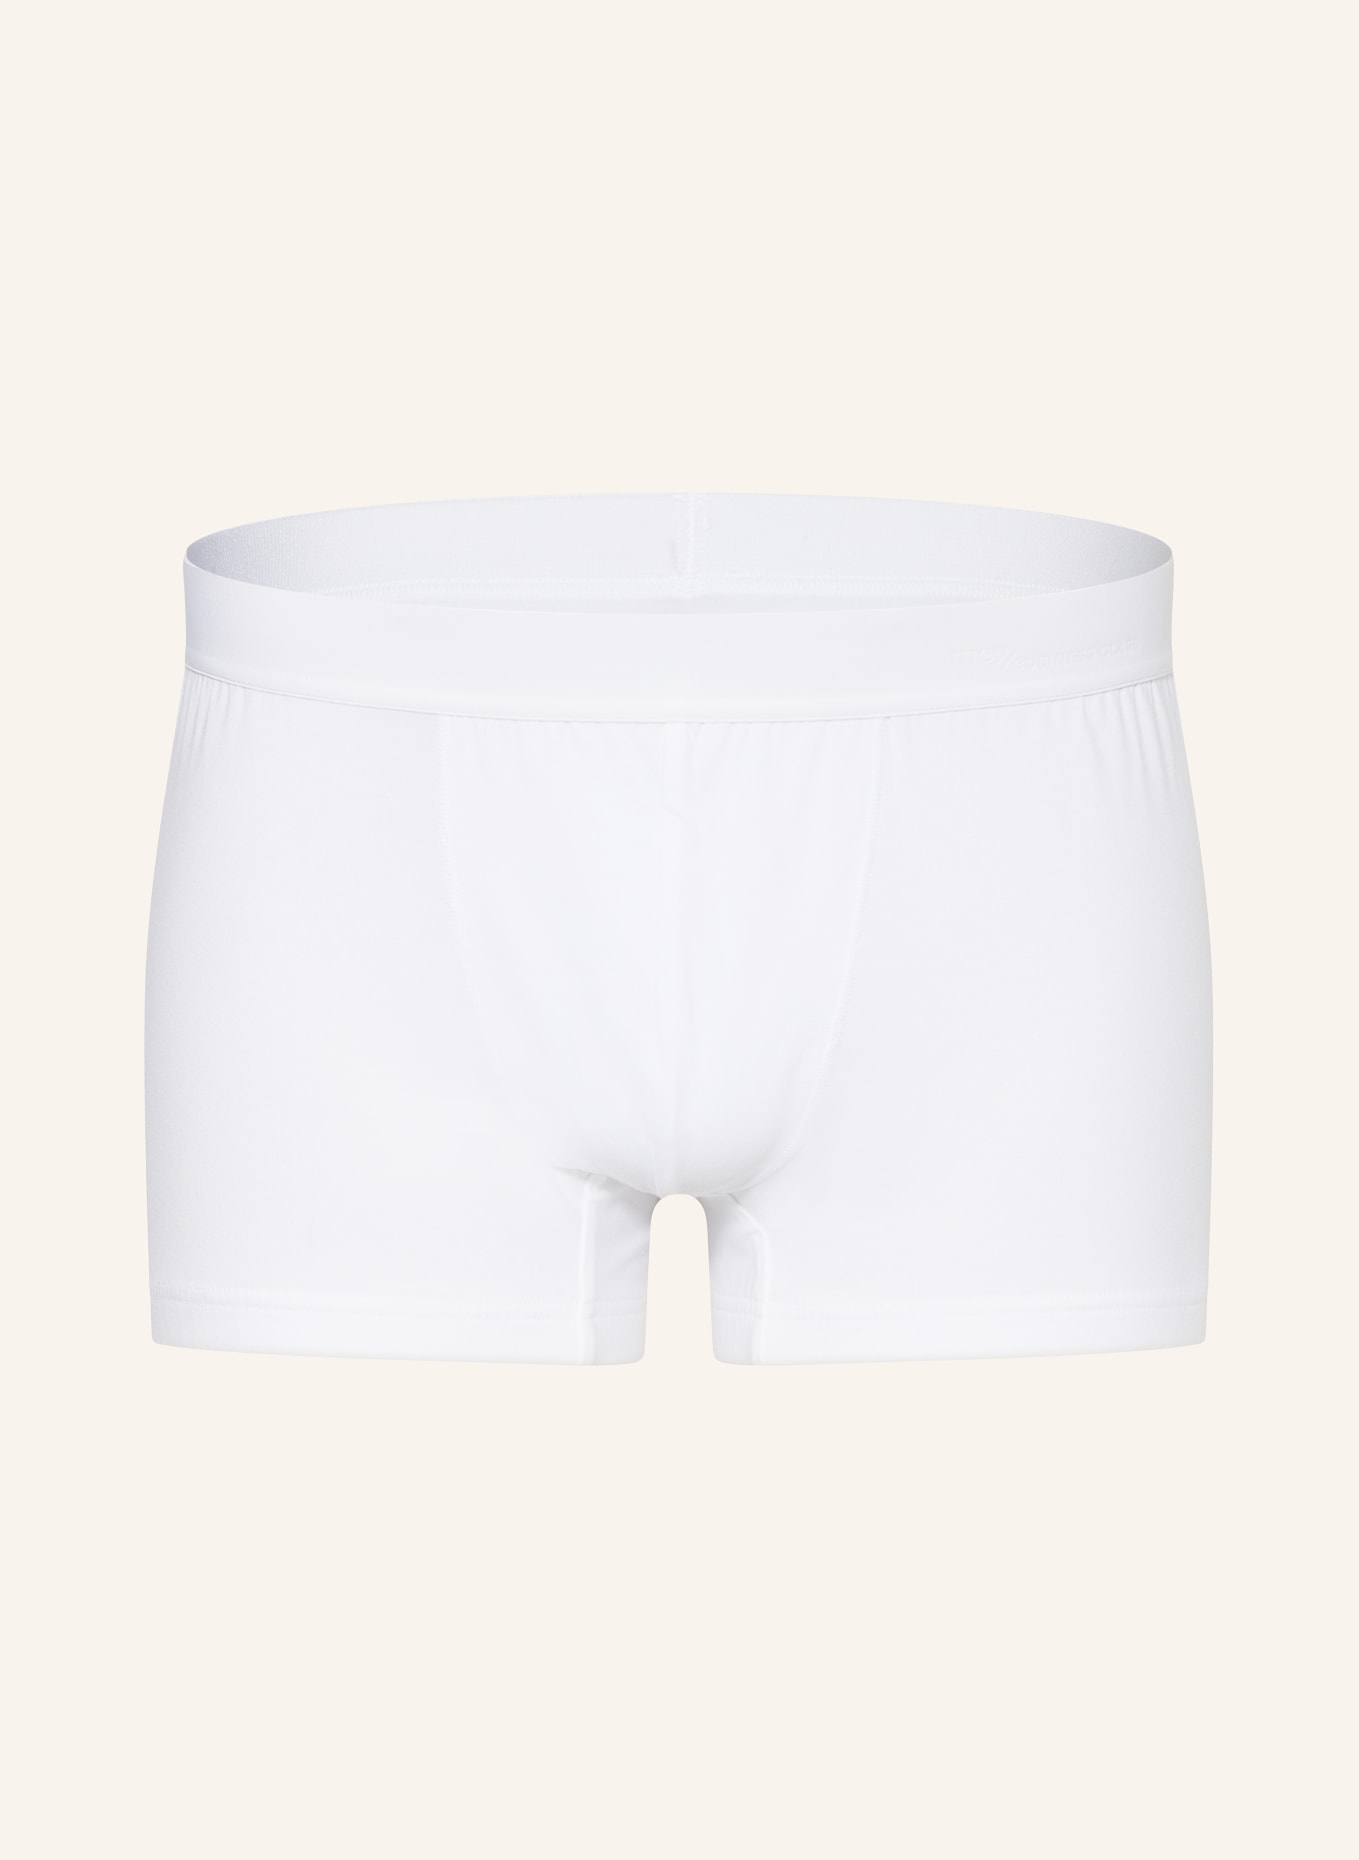 mey Boxer shorts series BUSINESS CLASS, Color: WHITE (Image 1)